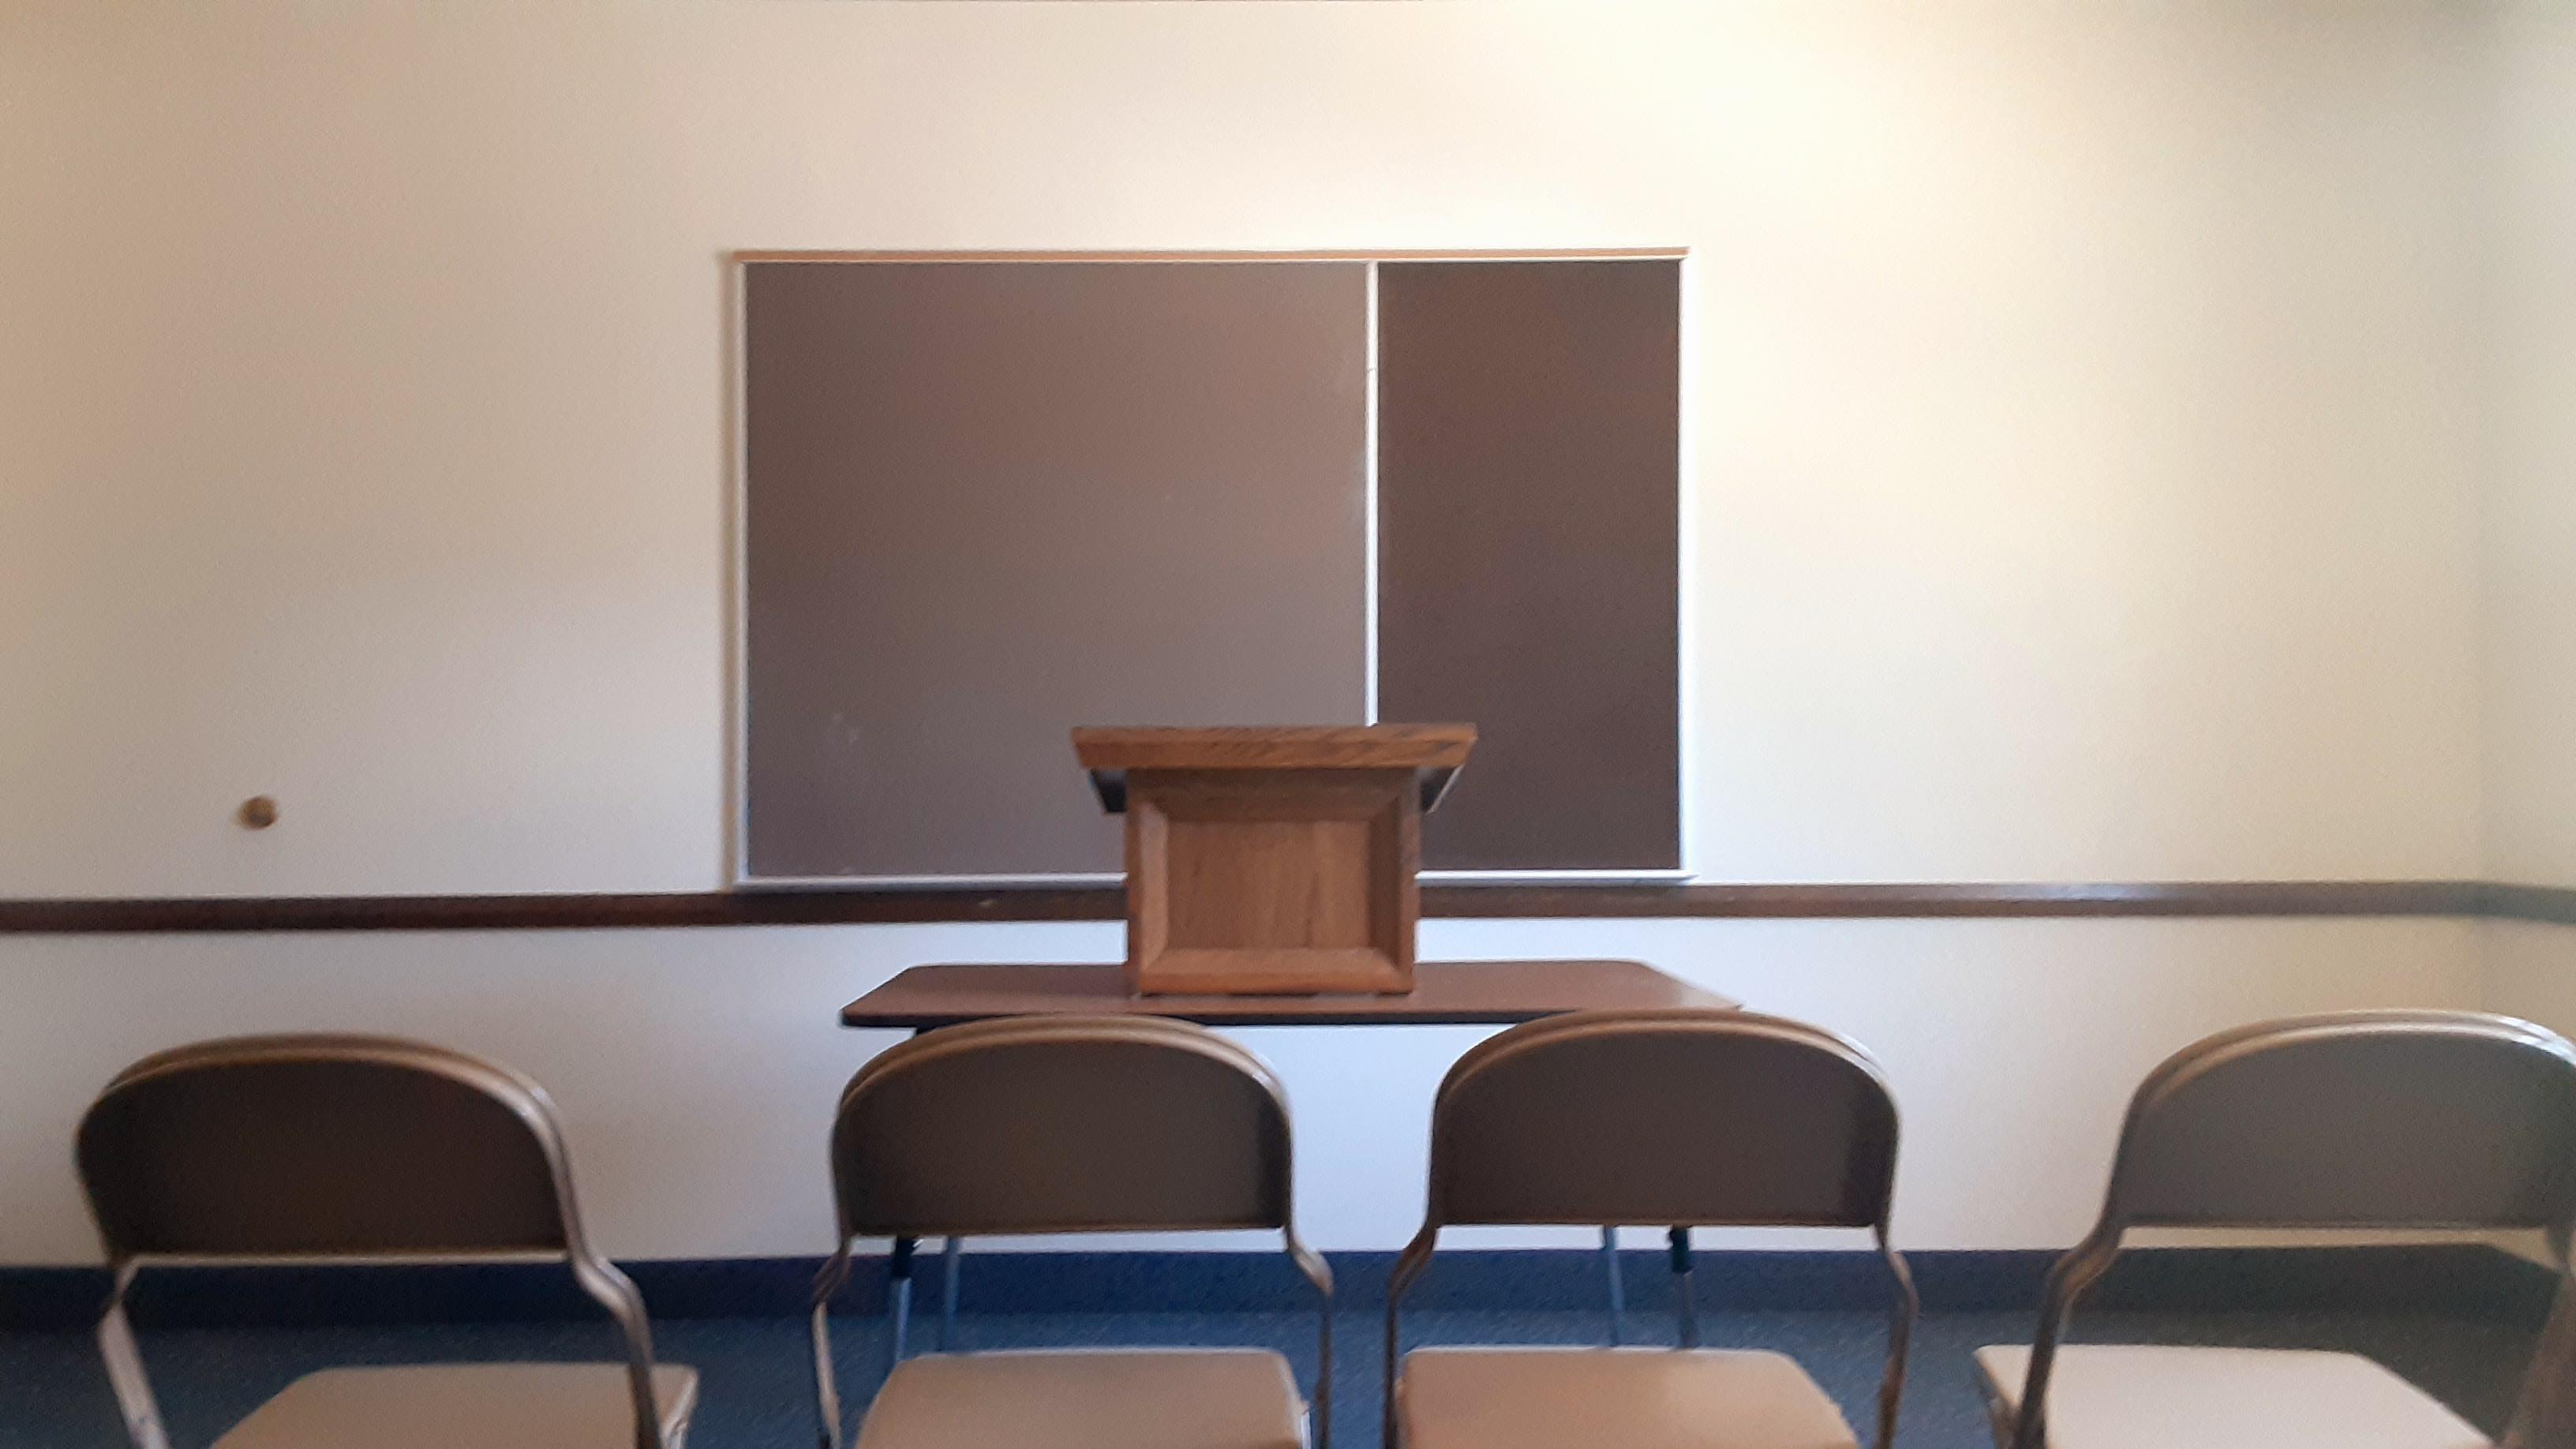 A classroom of the Hawthorne and Quinn Building of The Church of Jesus Christ of Latter-day Saints located at 4010 Hawthorne Road in Pocatello, Idaho.